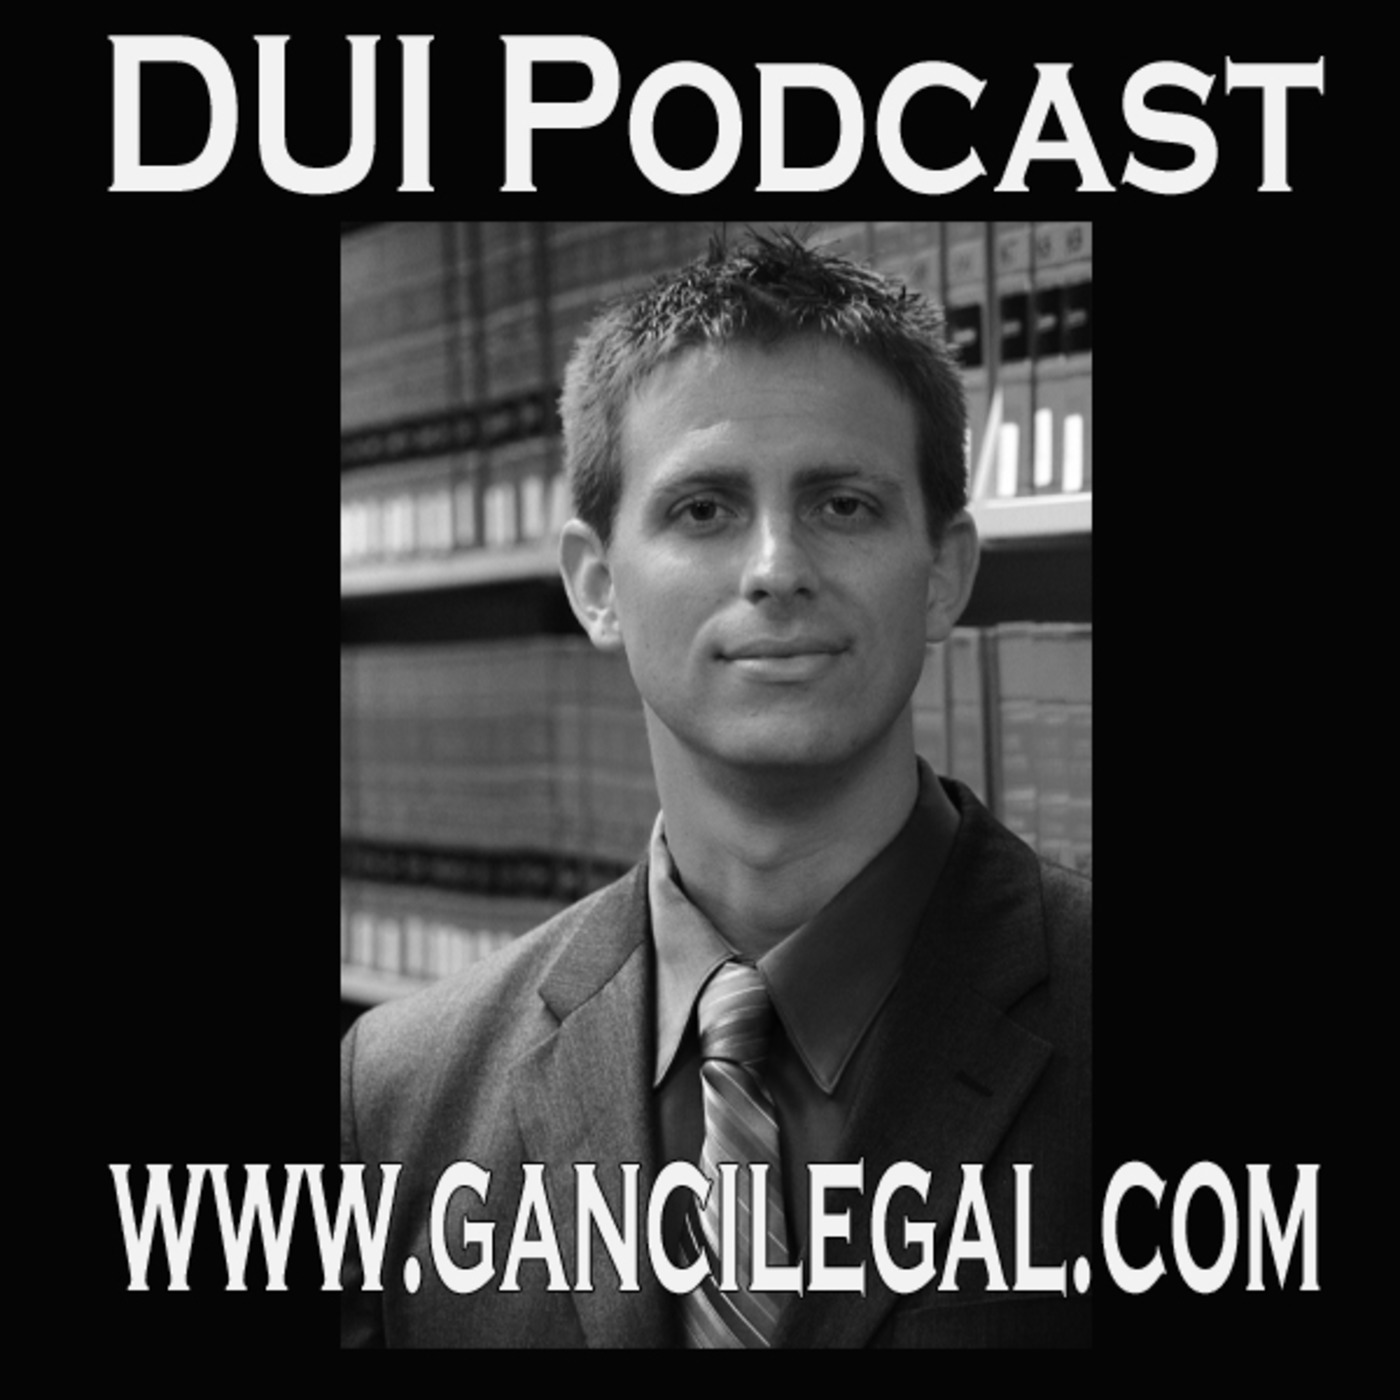 DUI Podcast: Episode 28